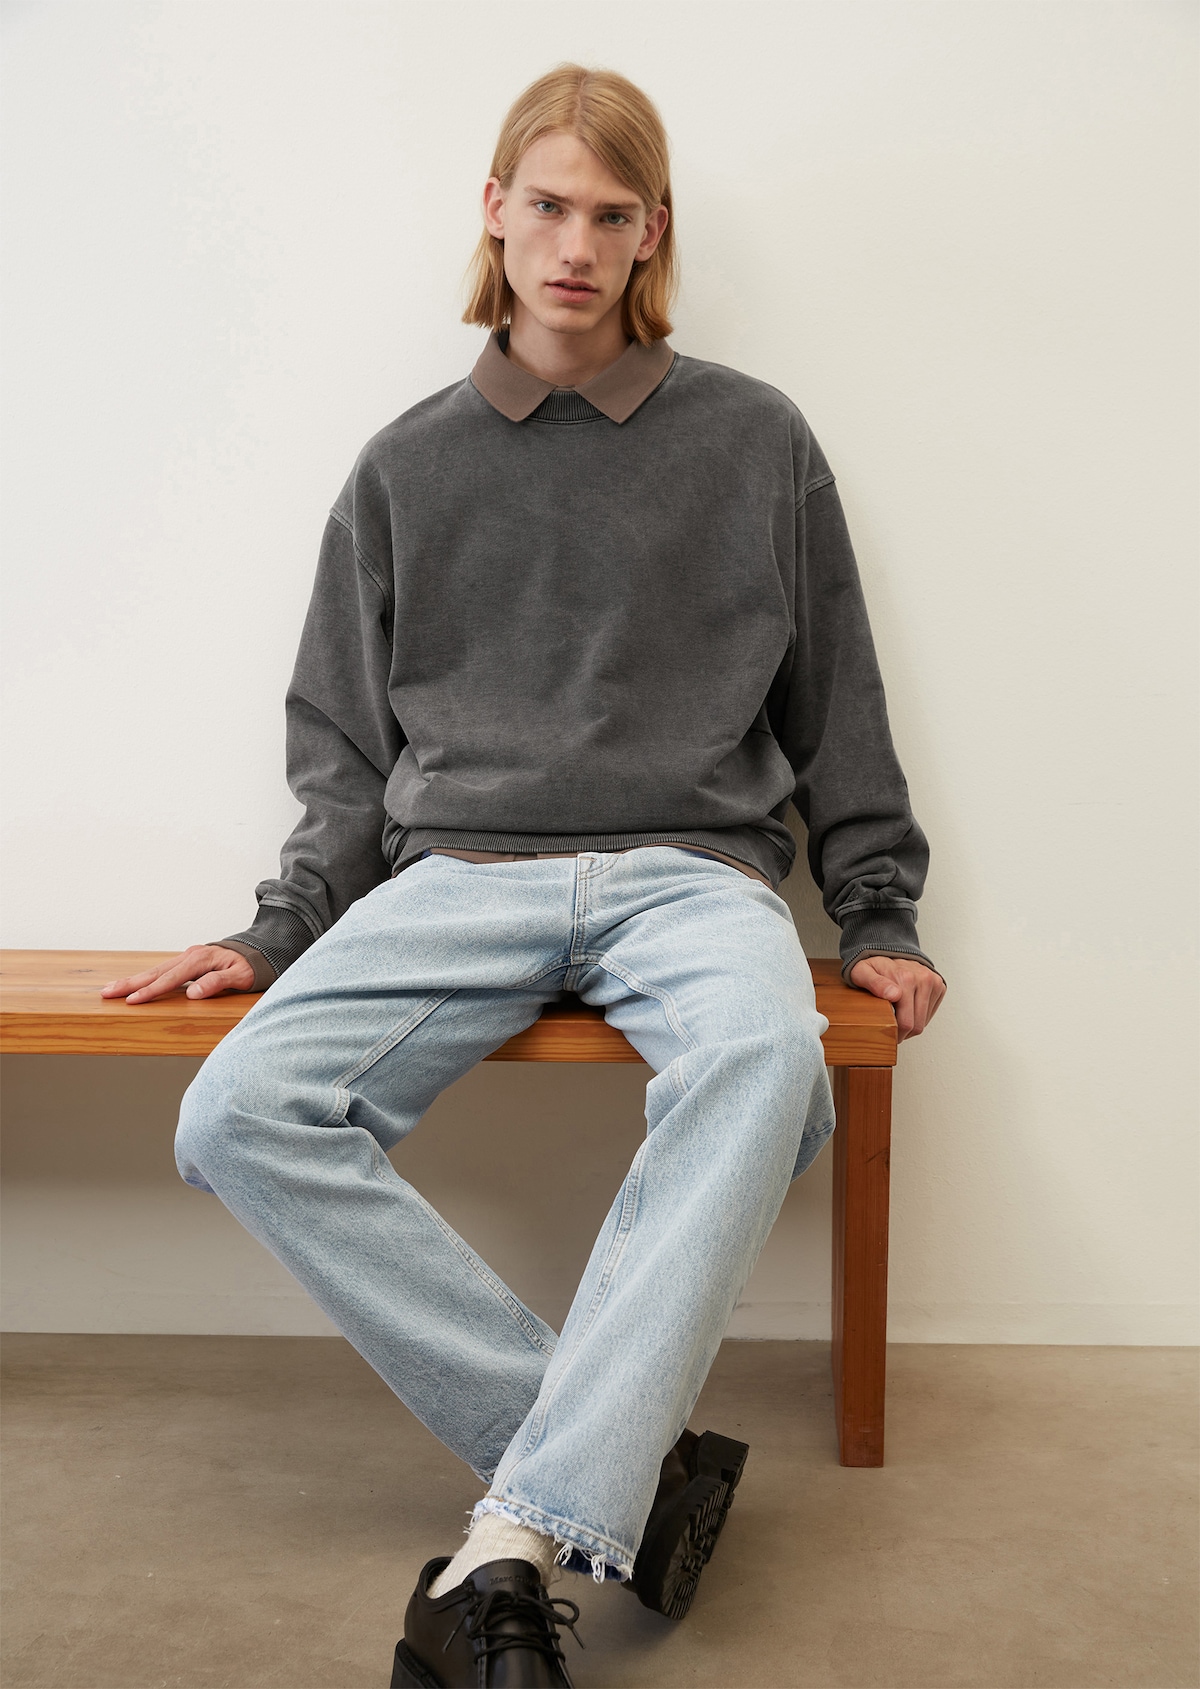 Stone-washed sweatshirt, relaxed fit made from soft organic cotton - gray |  Crew Neck Sweater | MARC O'POLO